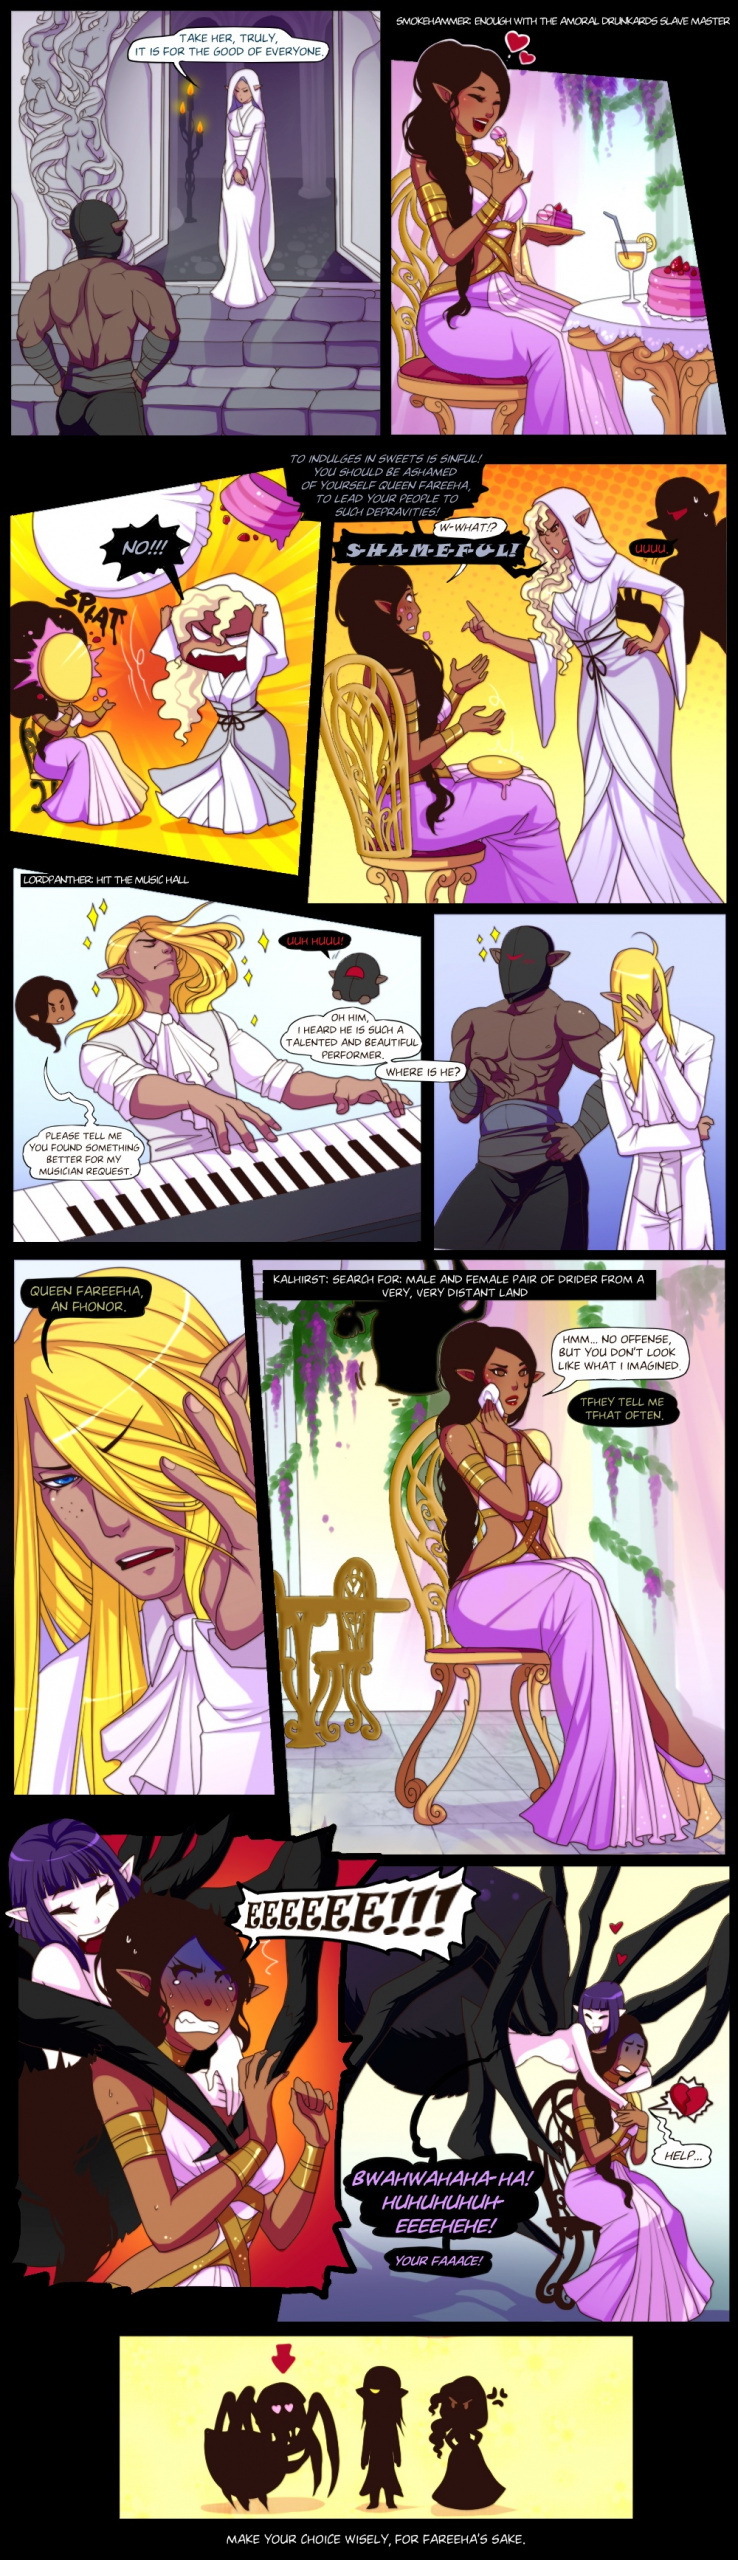 Queen of Butts - Page 24